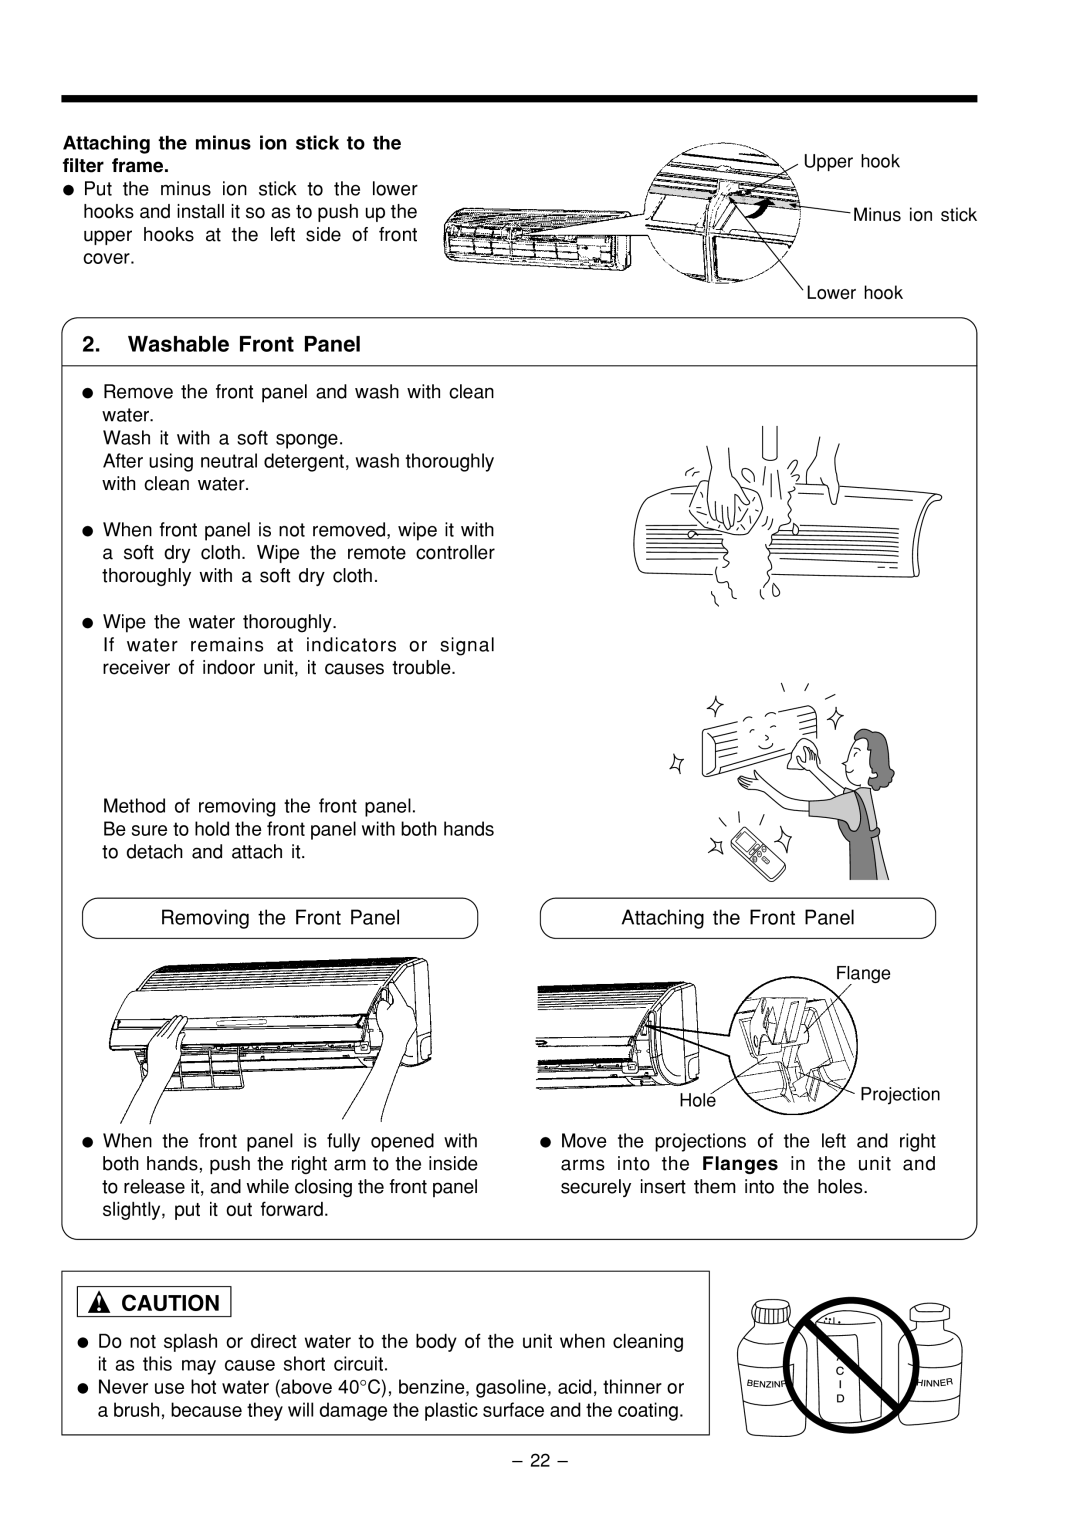 Hitachi RAS-80YHA instruction manual Washable Front Panel, Removing the Front Panel, Attaching the Front Panel 